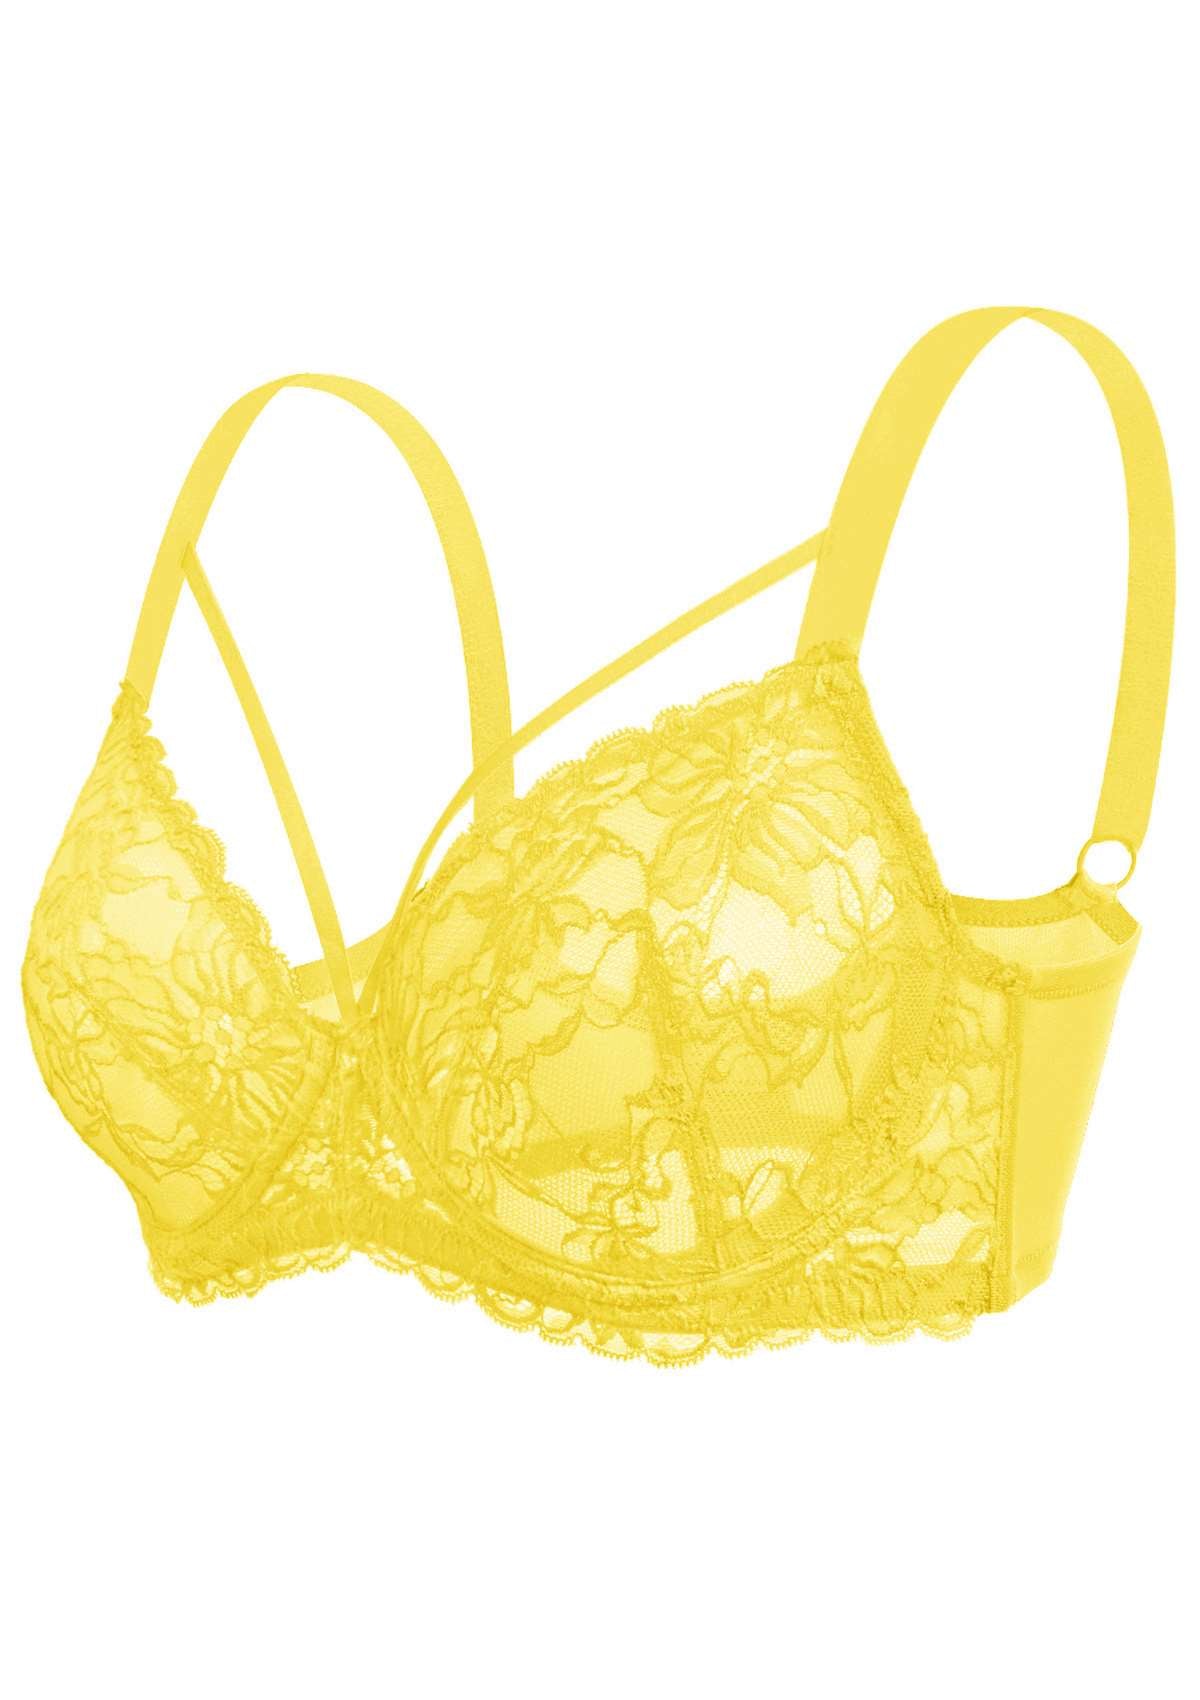 HSIA Unlined Lace Mesh Minimizer Bra For Large Breasts, Full Coverage - Bright Yellow / 44 / DDD/F